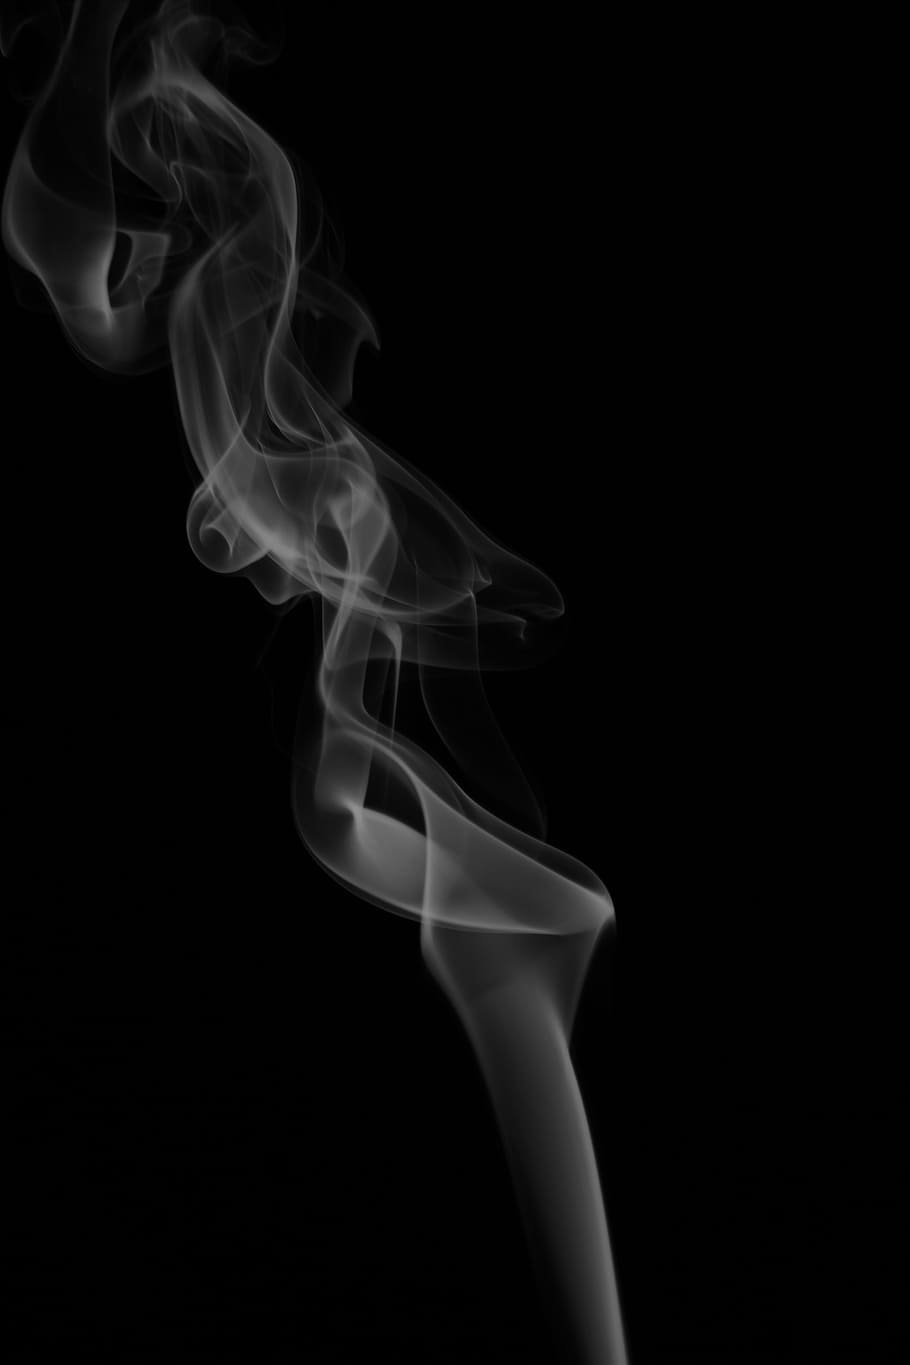 white smoke, smoke, photography, smoke photography, smoke - Physical Structure, black Color, abstract, backgrounds, curve, swirl